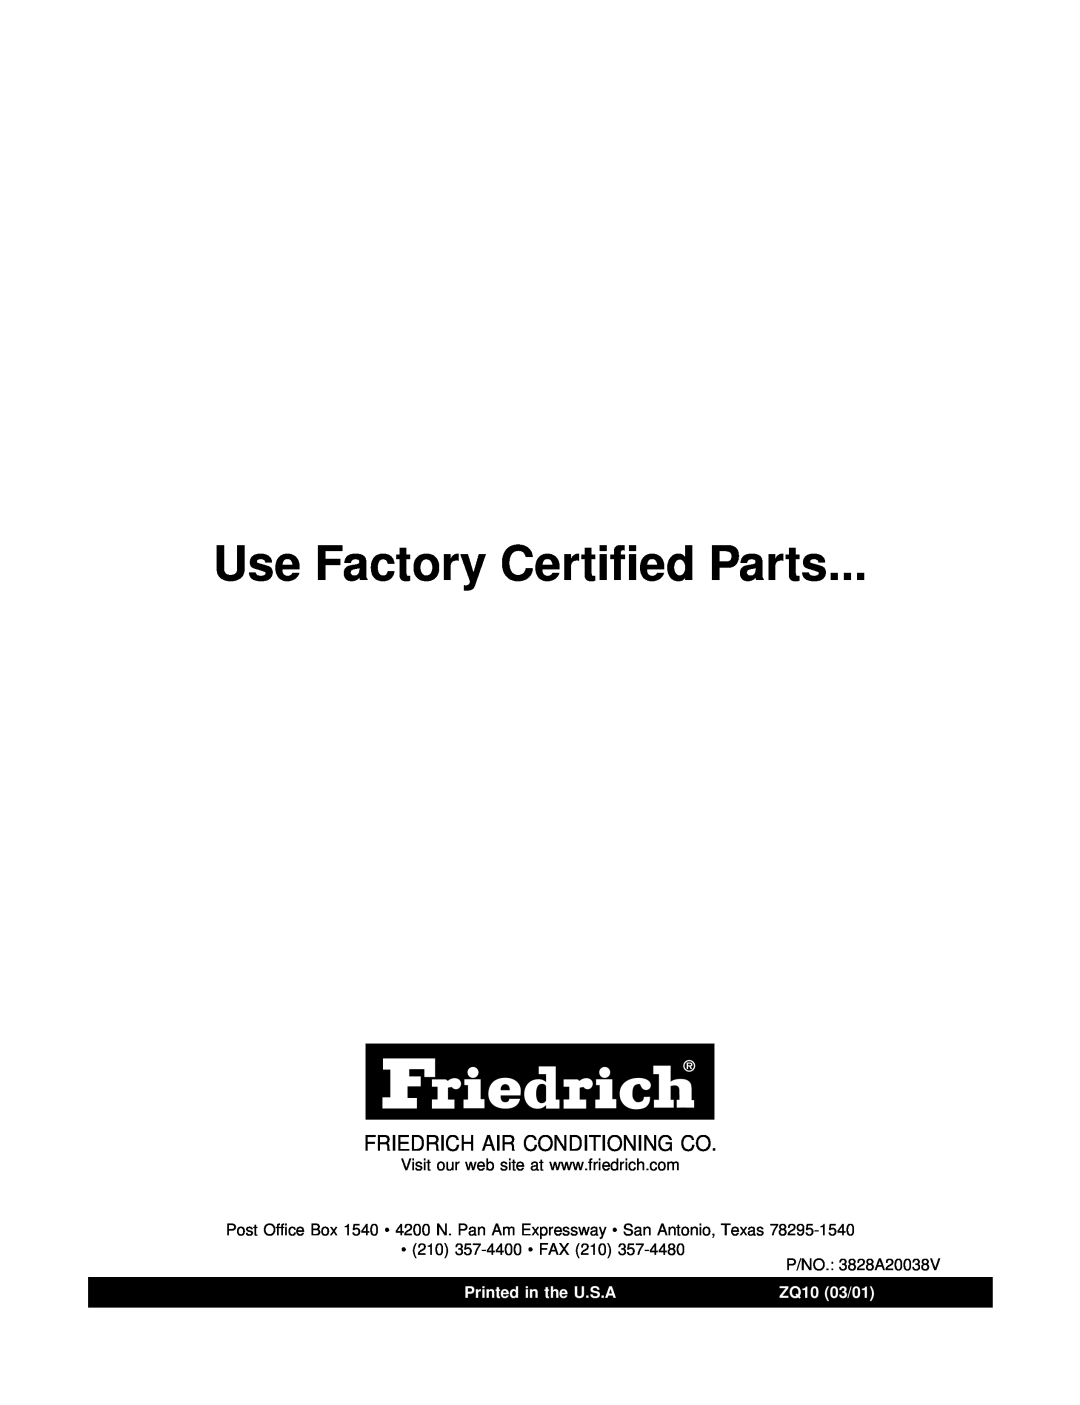 Friedrich ZQ10 A10B manual Friedrich Air Conditioning Co, Use Factory Certified Parts, ZQ10 03/01 